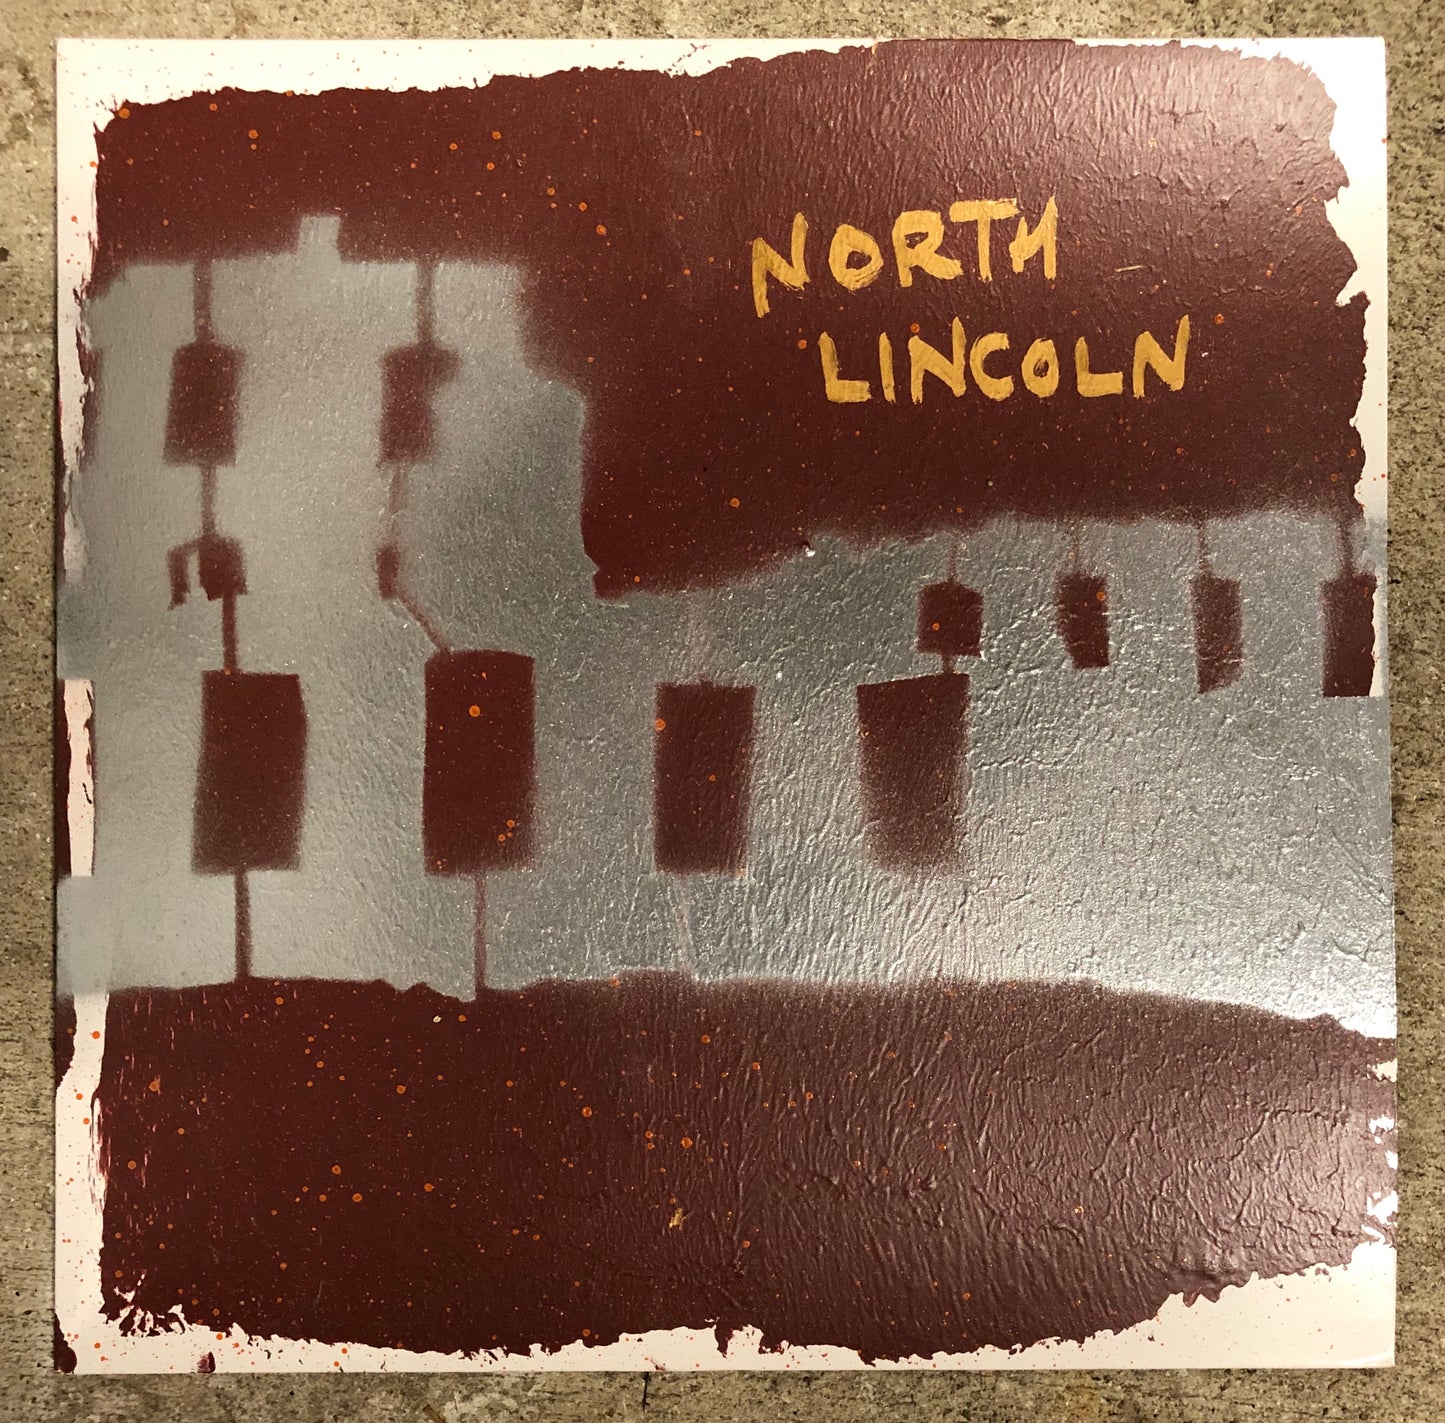 NORTH LINCOLN "Midwestern Blood" LIMITED STENCIL COVER